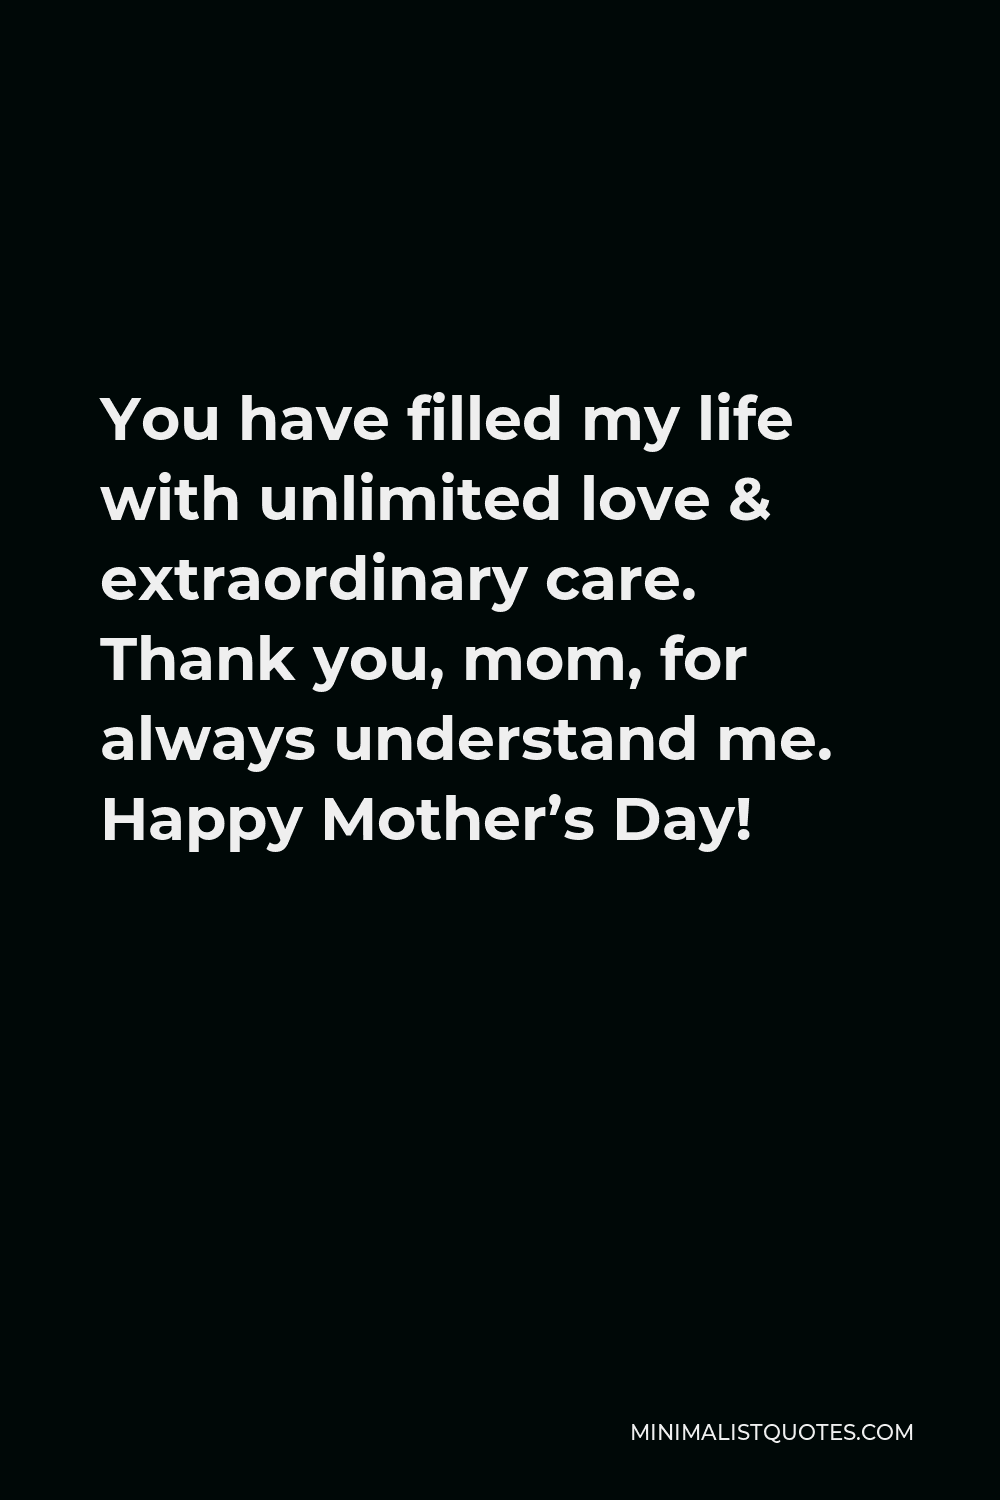 You Have Filled My Life With Unlimited Love Extraordinary Care Thank You Mom For Always Understand Me Happy Mother S Day